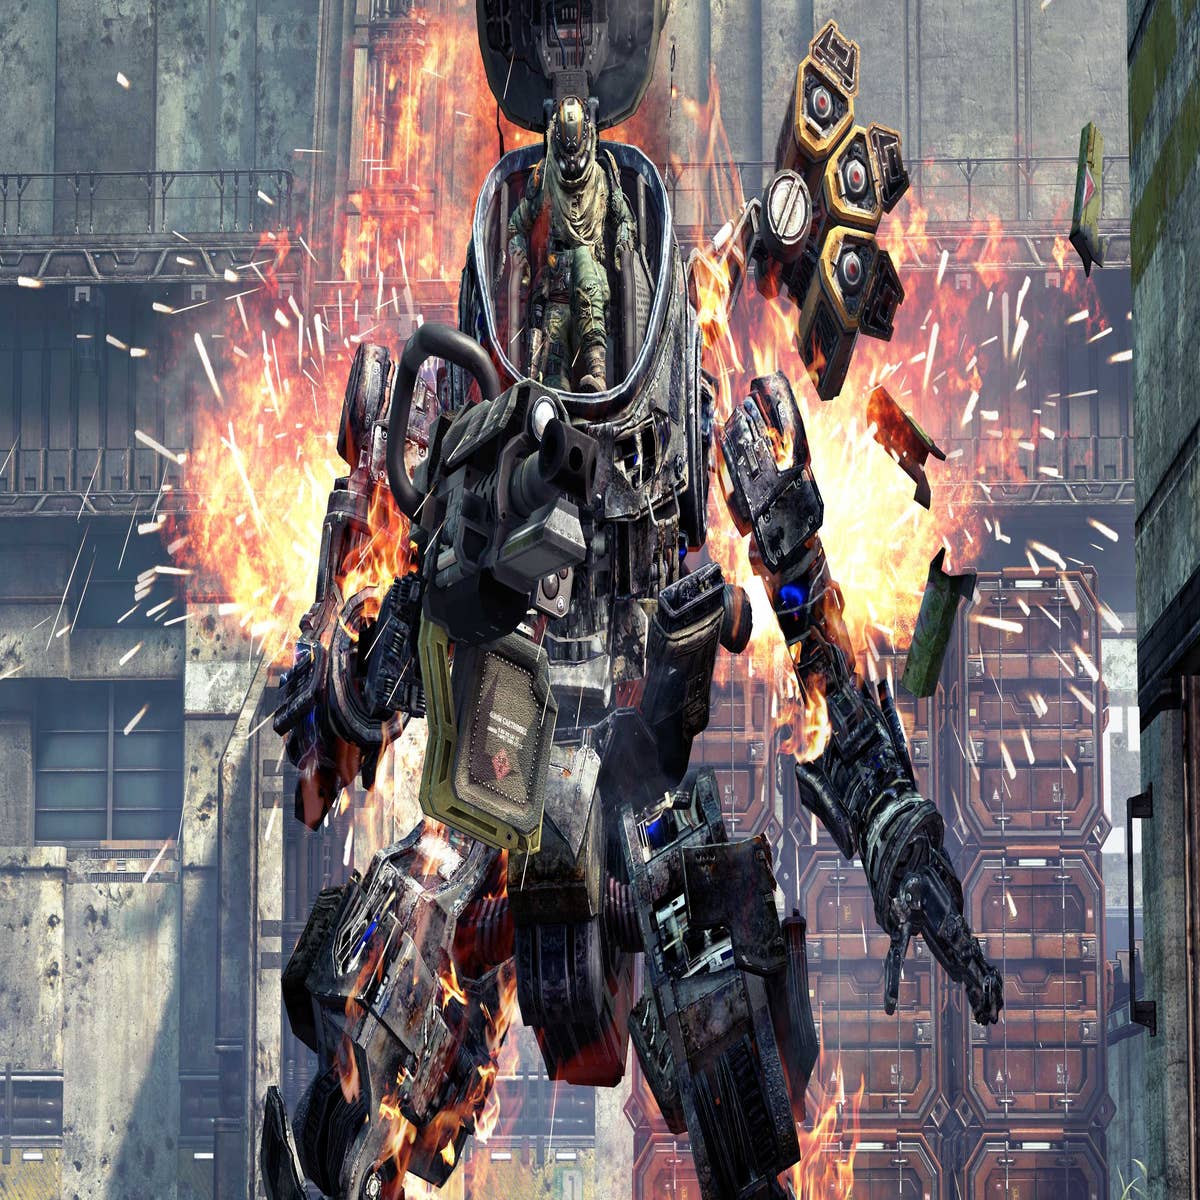 TitanFall Titans Loadouts & Setup - ALL Customization Options, Weapon  Types, Abilities Gameplay 